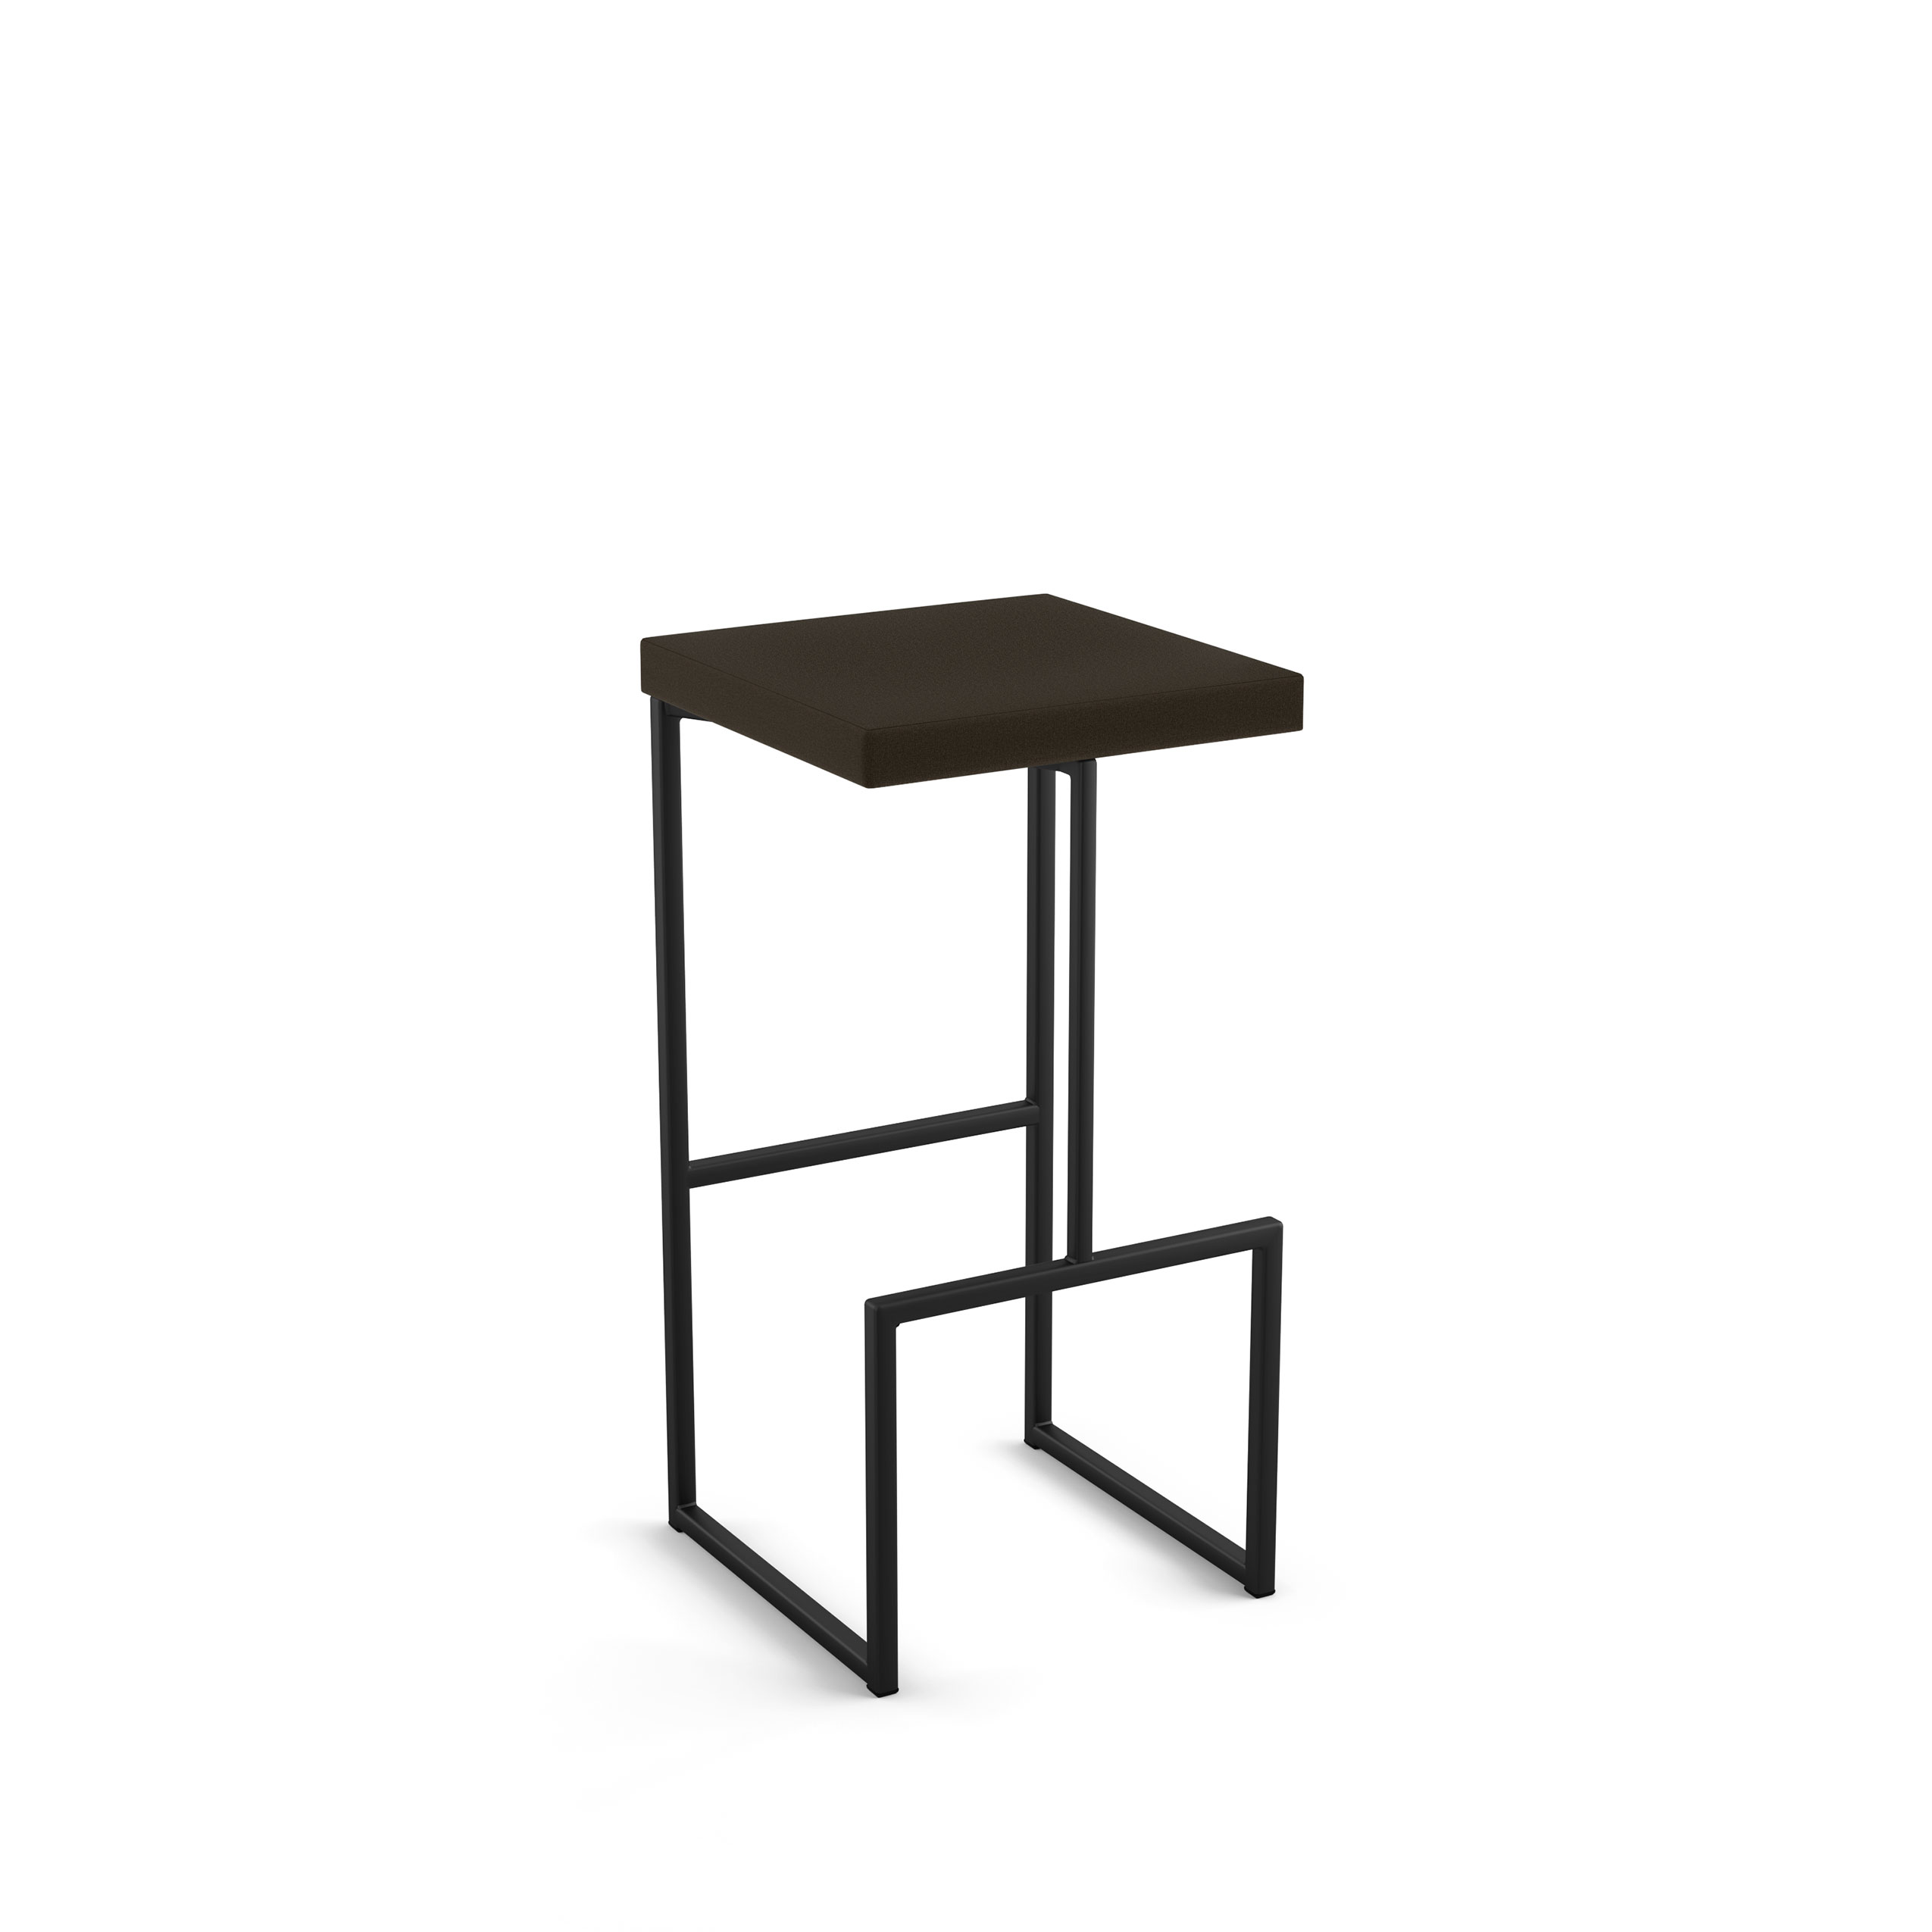 Fred by Amisco, a counter height bar height Wood Non Swivel Seat Metal Frame stool